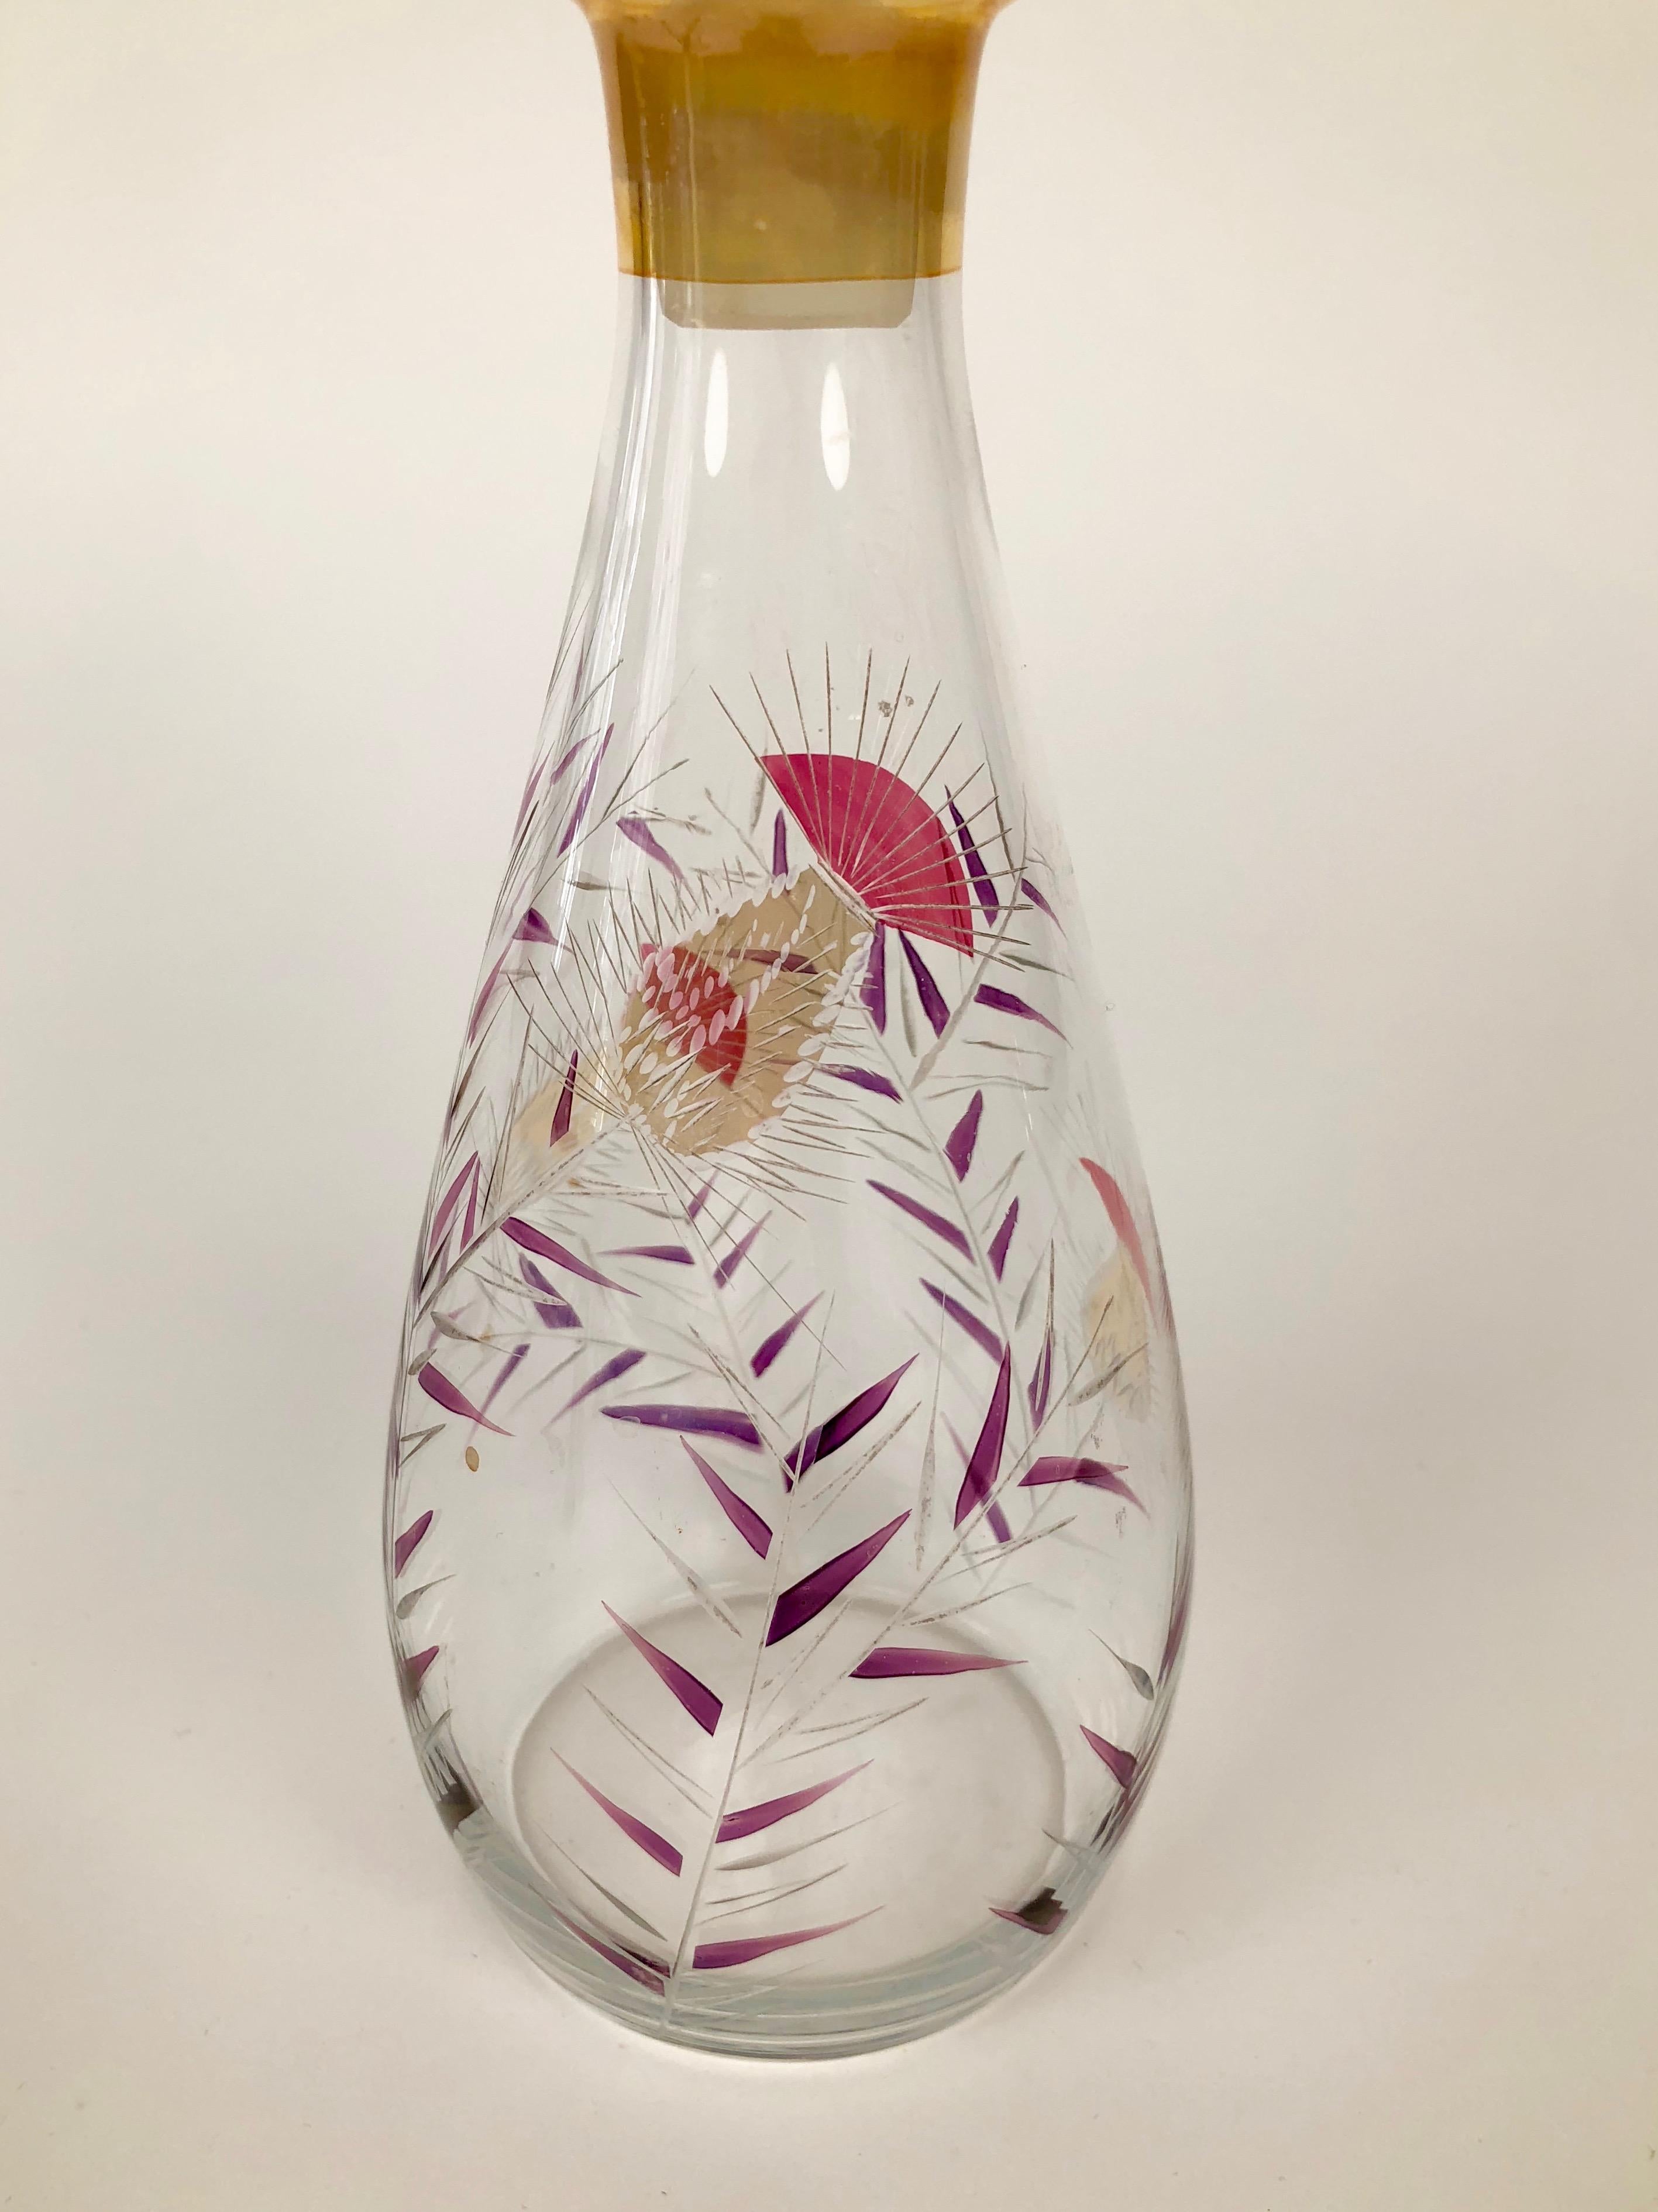 Glass carafe for liquor with hand painted thistle pattern. The details in the patterns are cut in the glass.
Made in Czechoslovakia.

You can use them for liquor or as a creative alternative for oils
and vinegars.
  